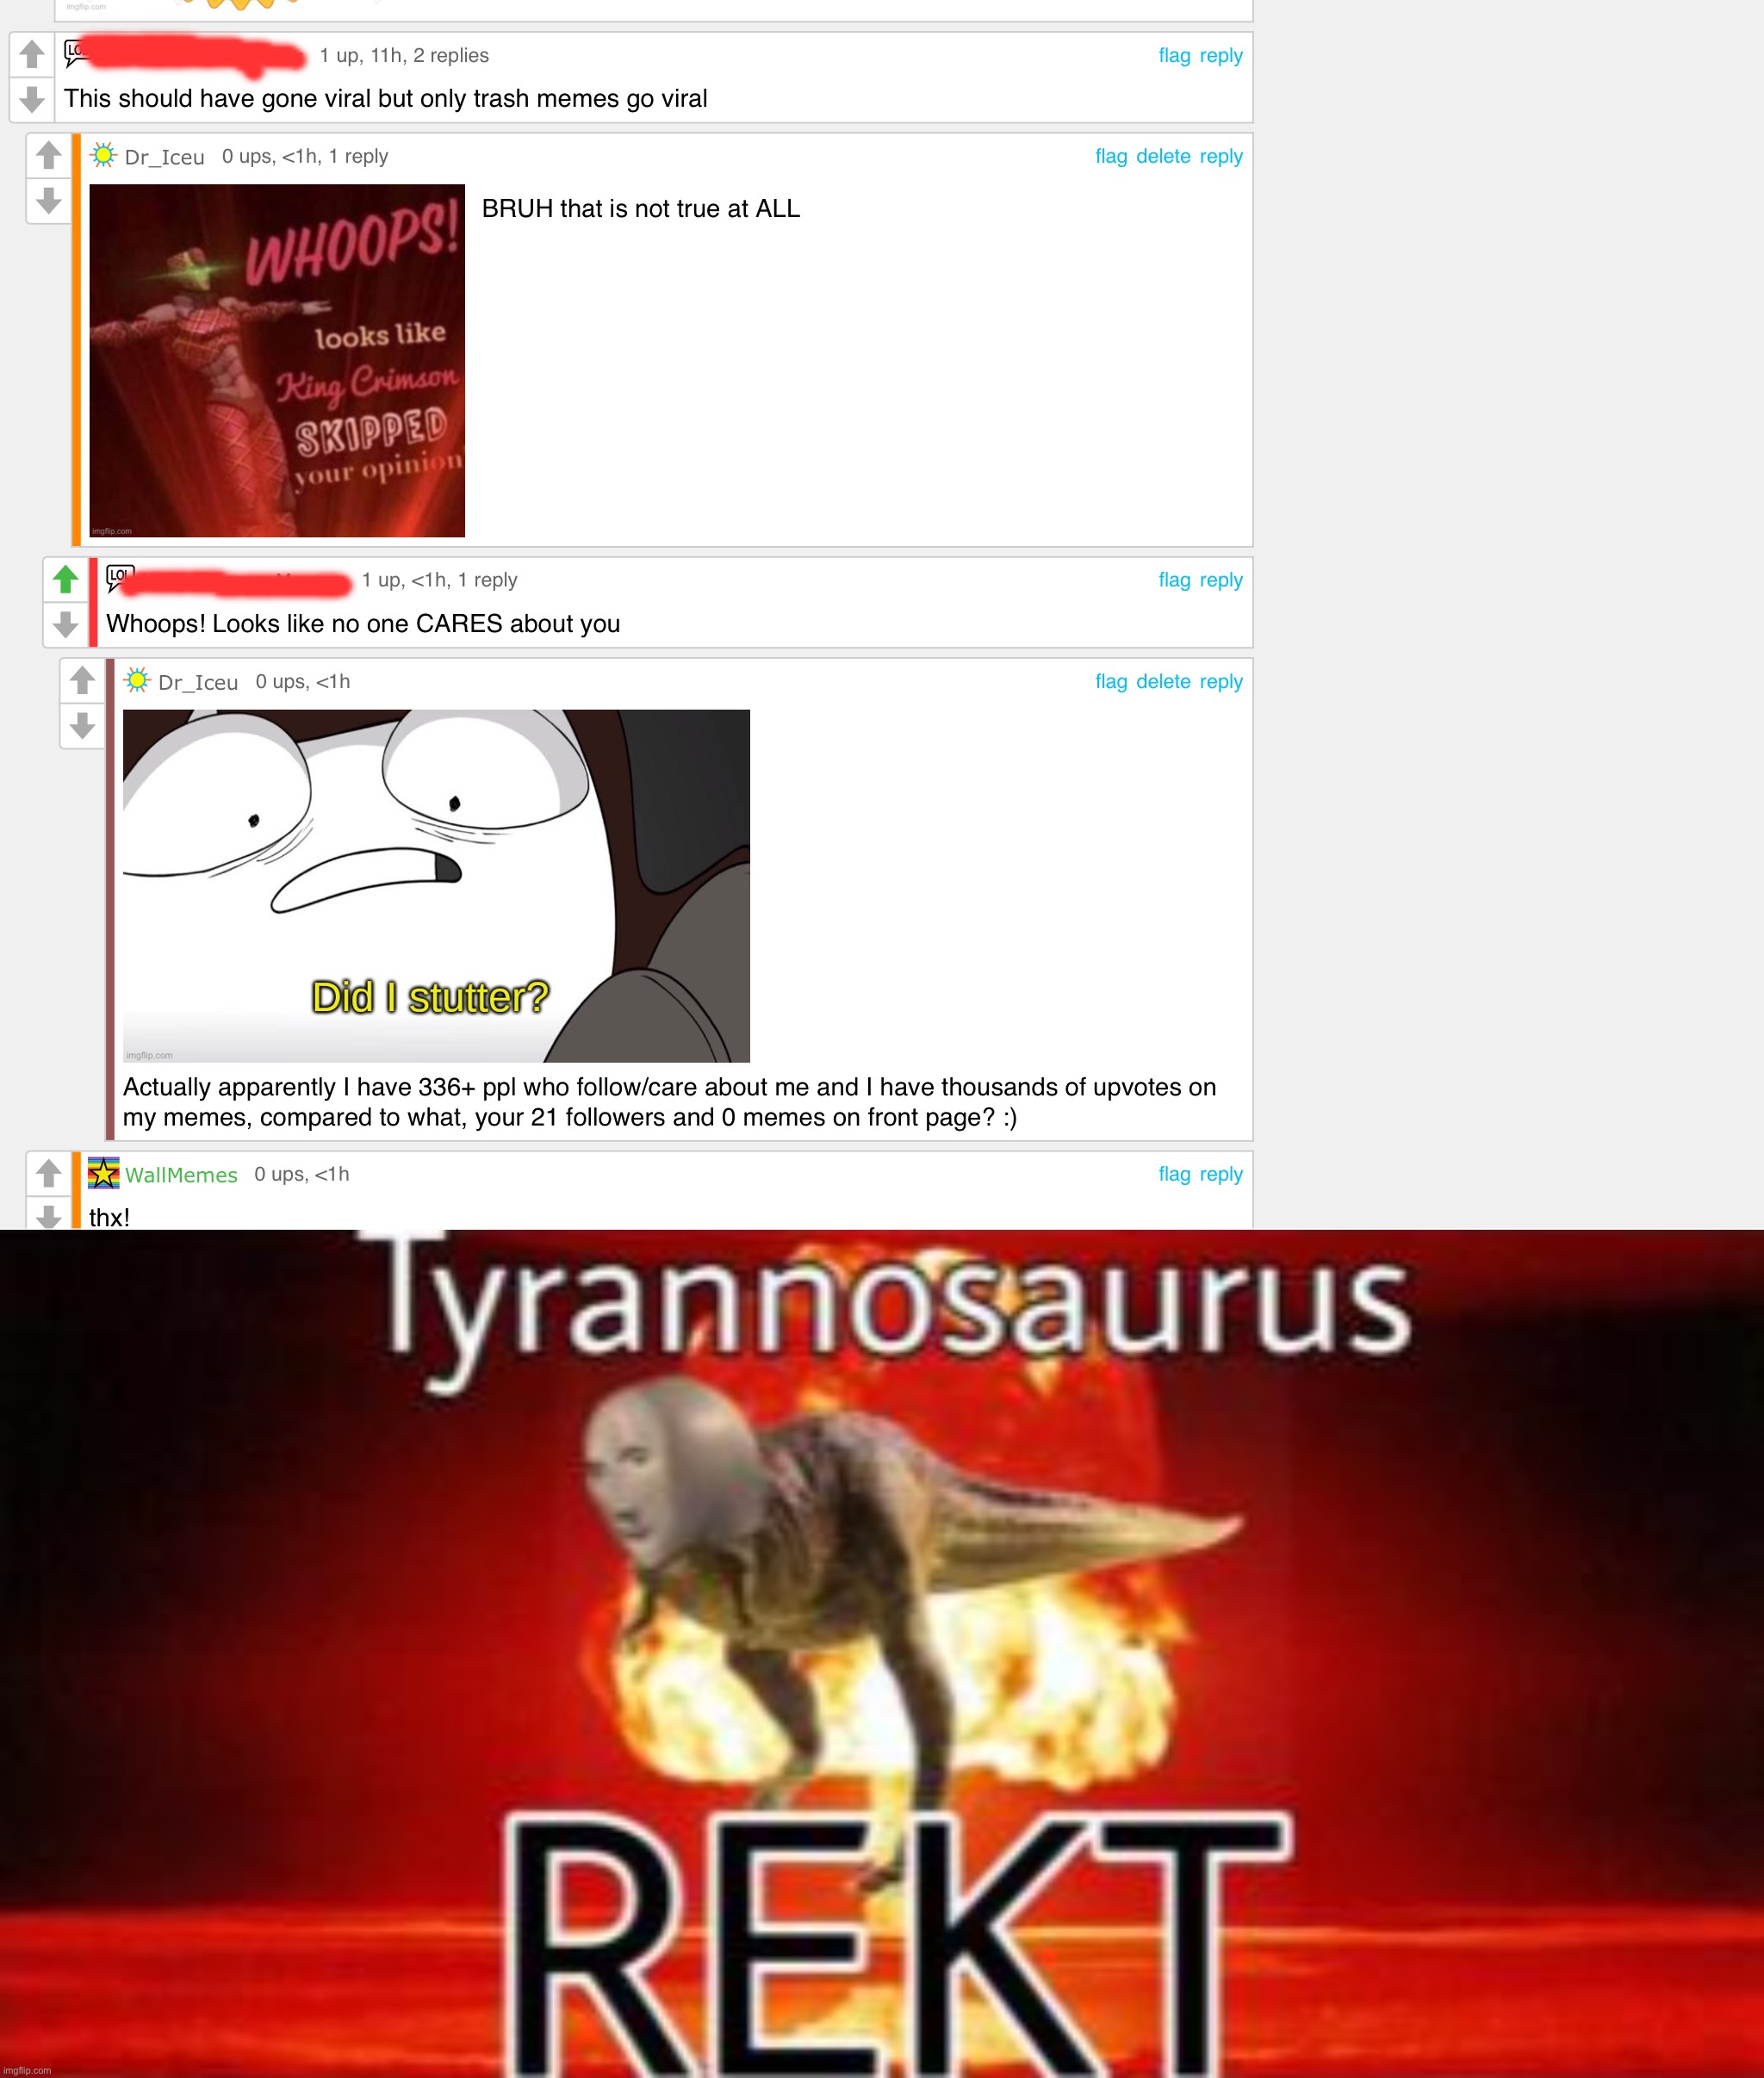 Wow, so untrue... | image tagged in tyrannosaurus rekt,memes,funny,rostid,oof,roasted | made w/ Imgflip meme maker